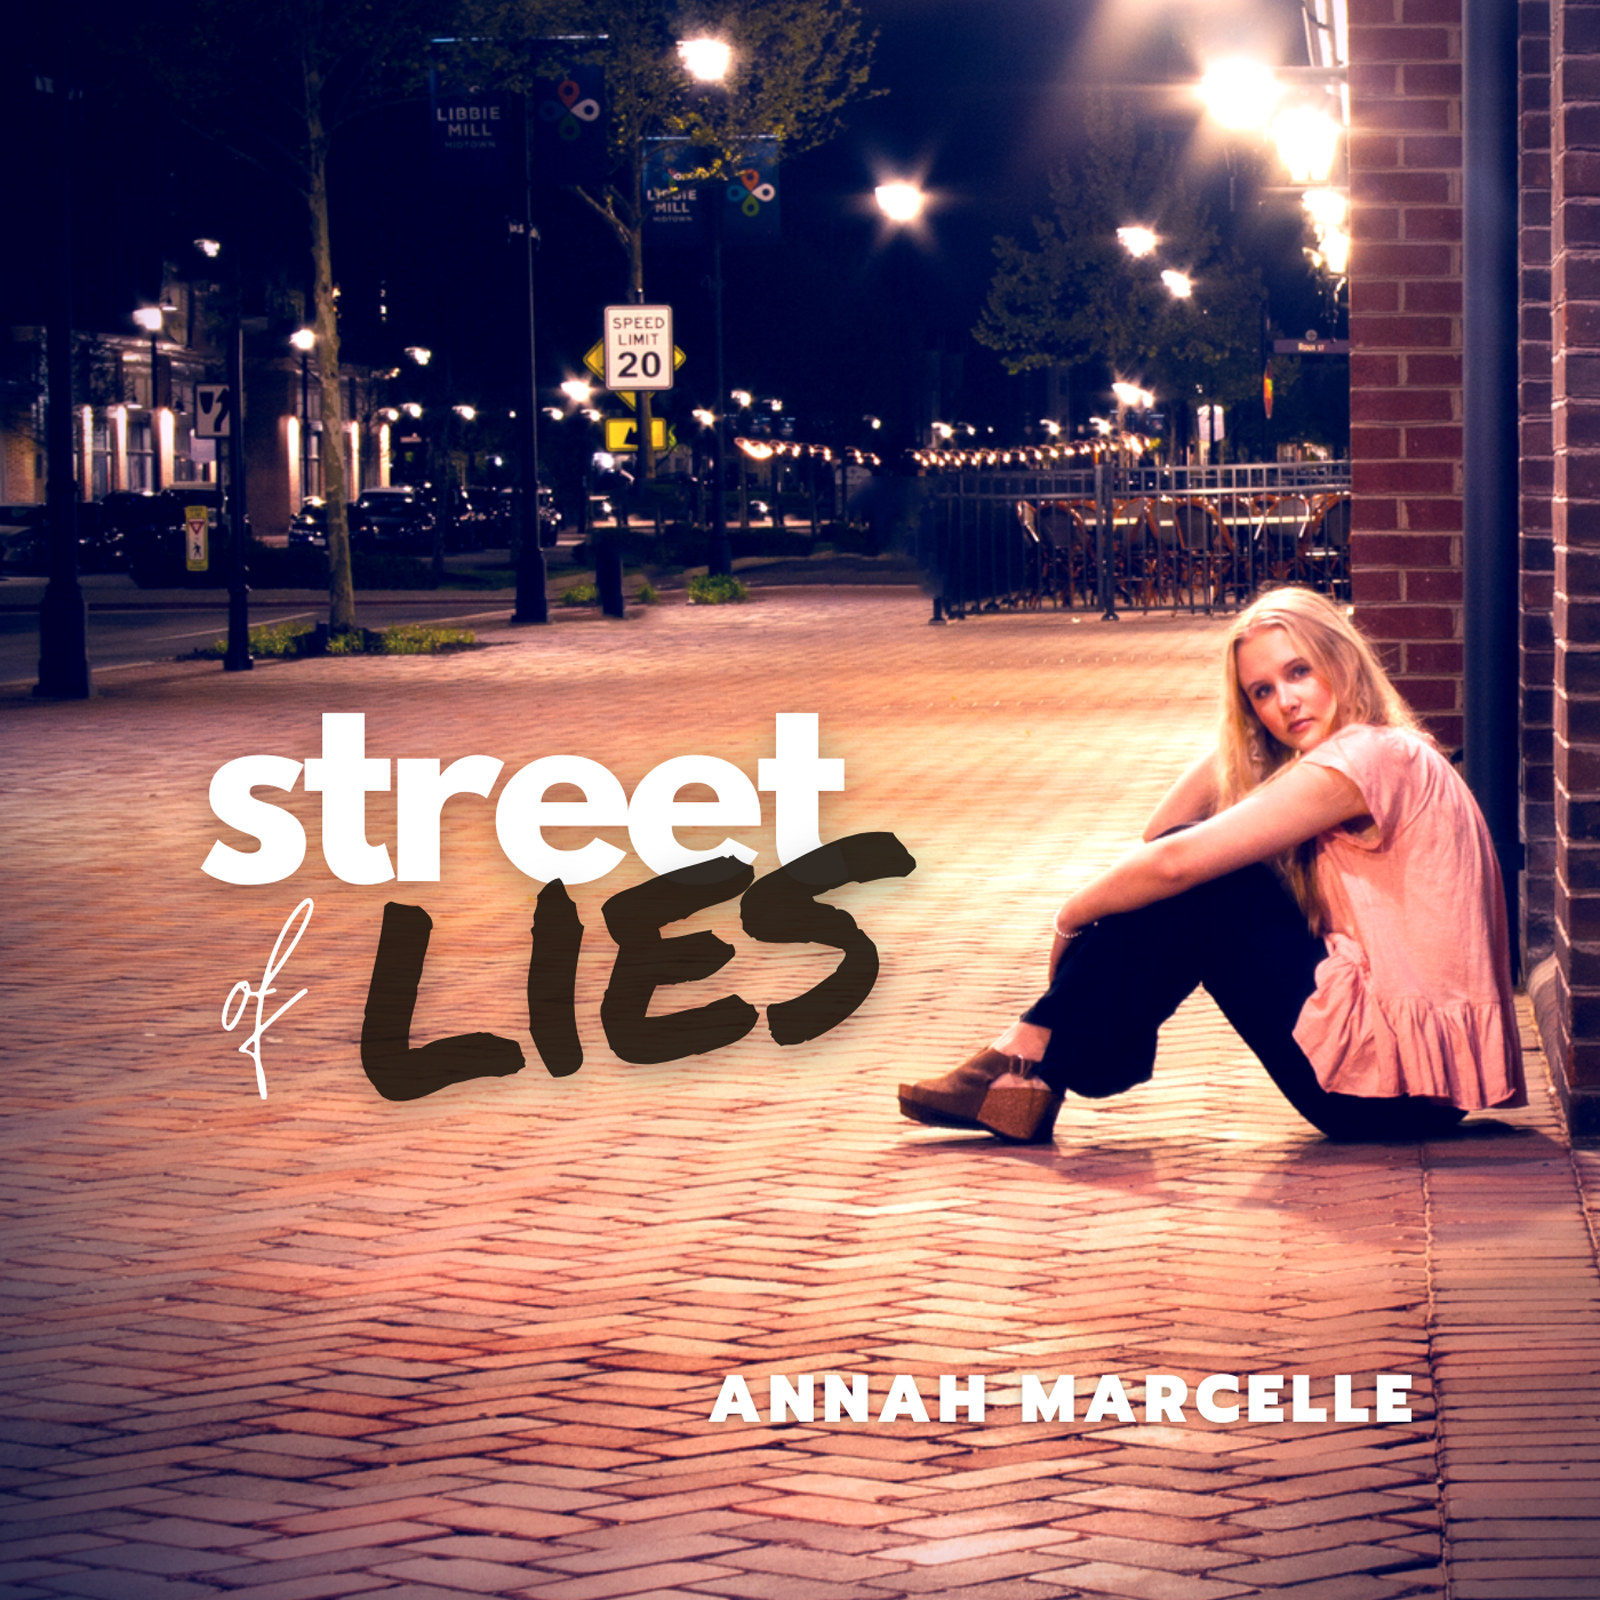 Annah Marcelle Tells Us To Avoid The “Street of Lies”